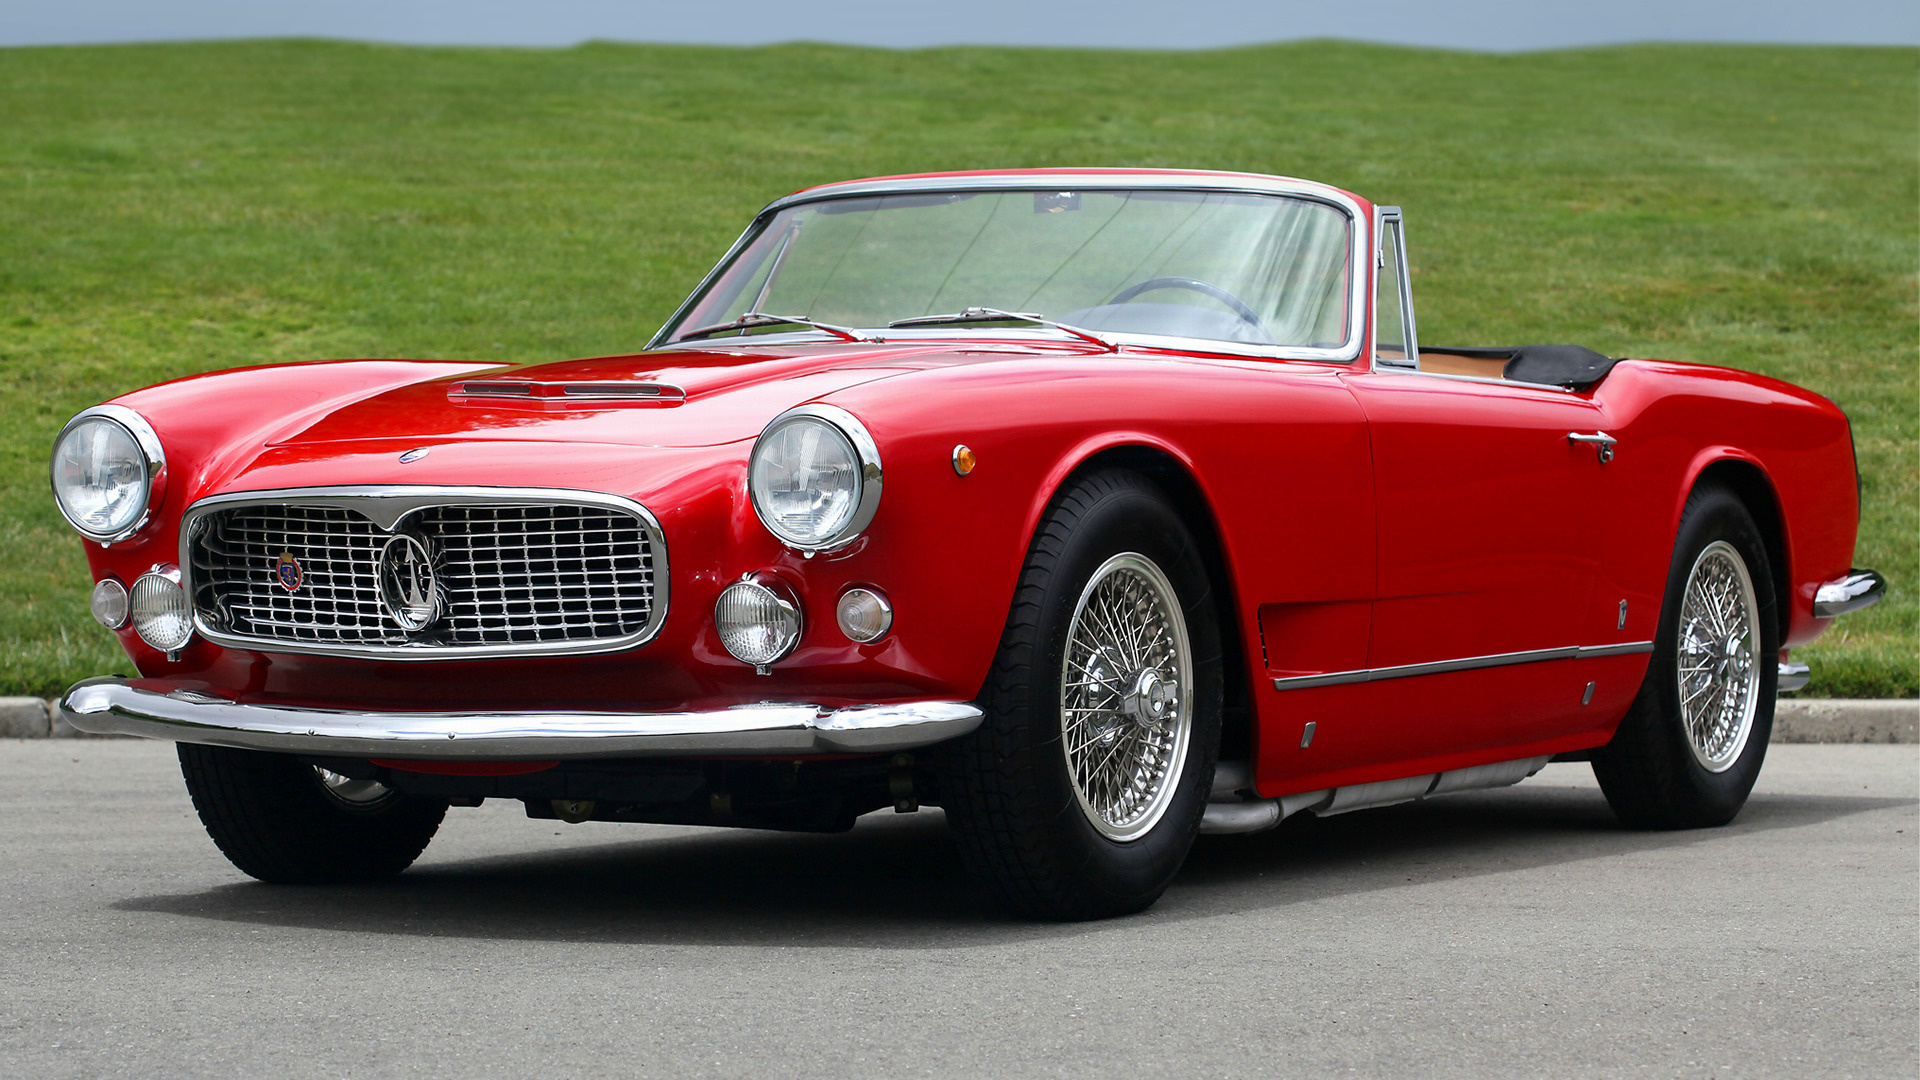 1960 Maserati 3500 GT Spyder - Wallpapers and HD Images ...